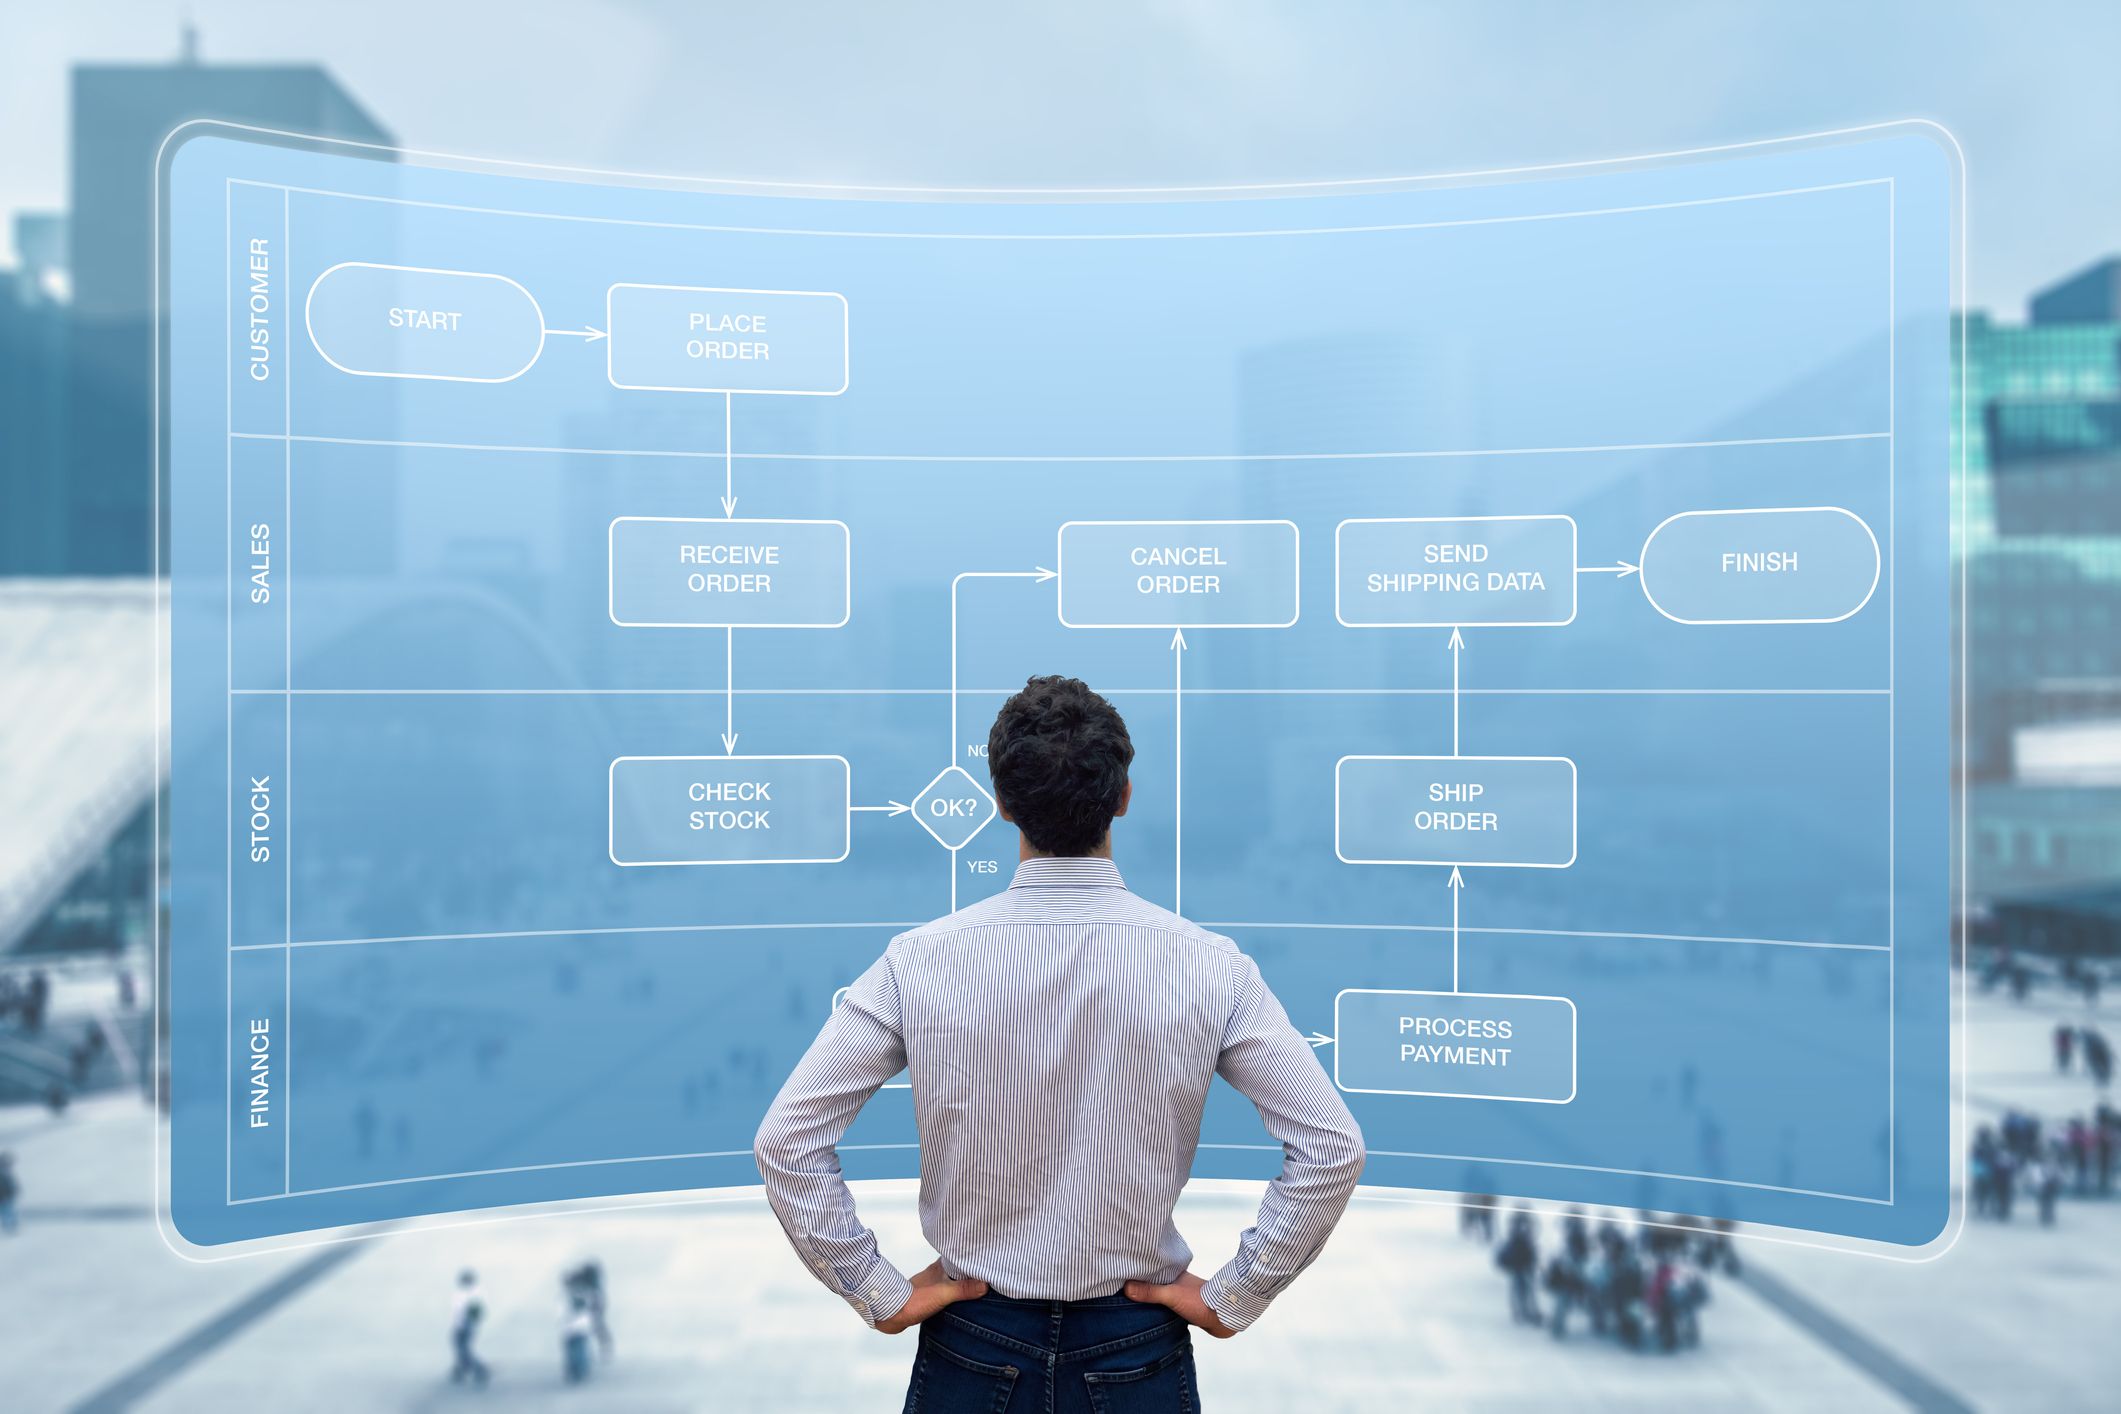 A man standing in front of a visualization of a business workflow